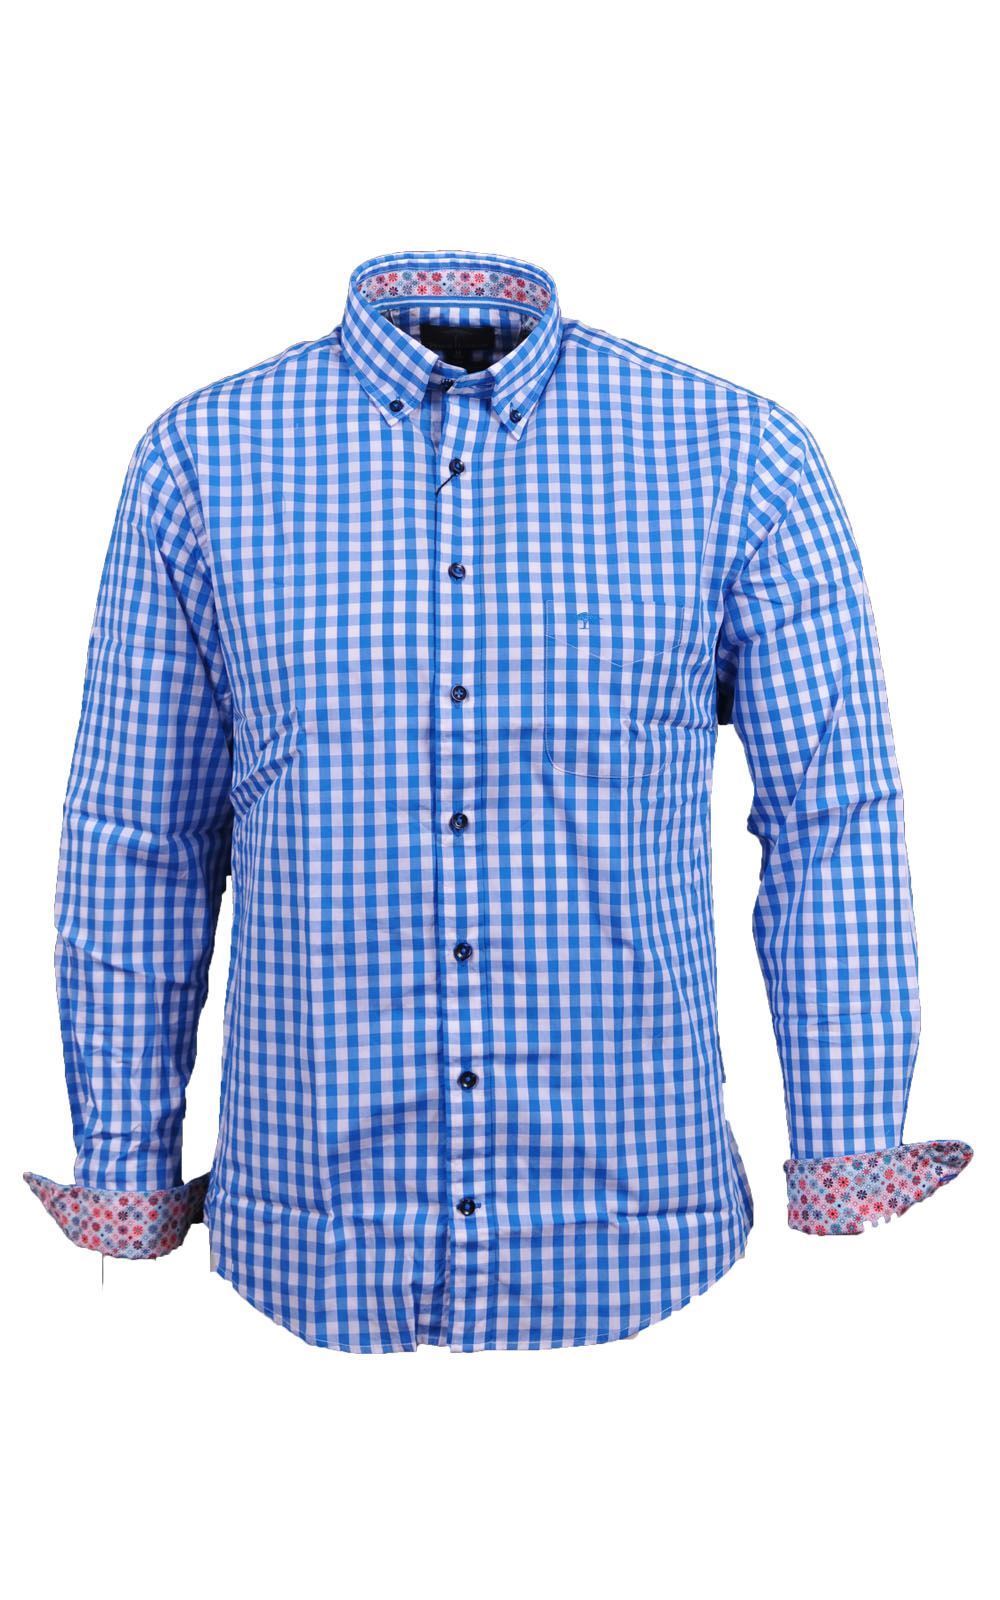 Picture of Fynch Hatton Long Sleeve Shirt 1120-5080